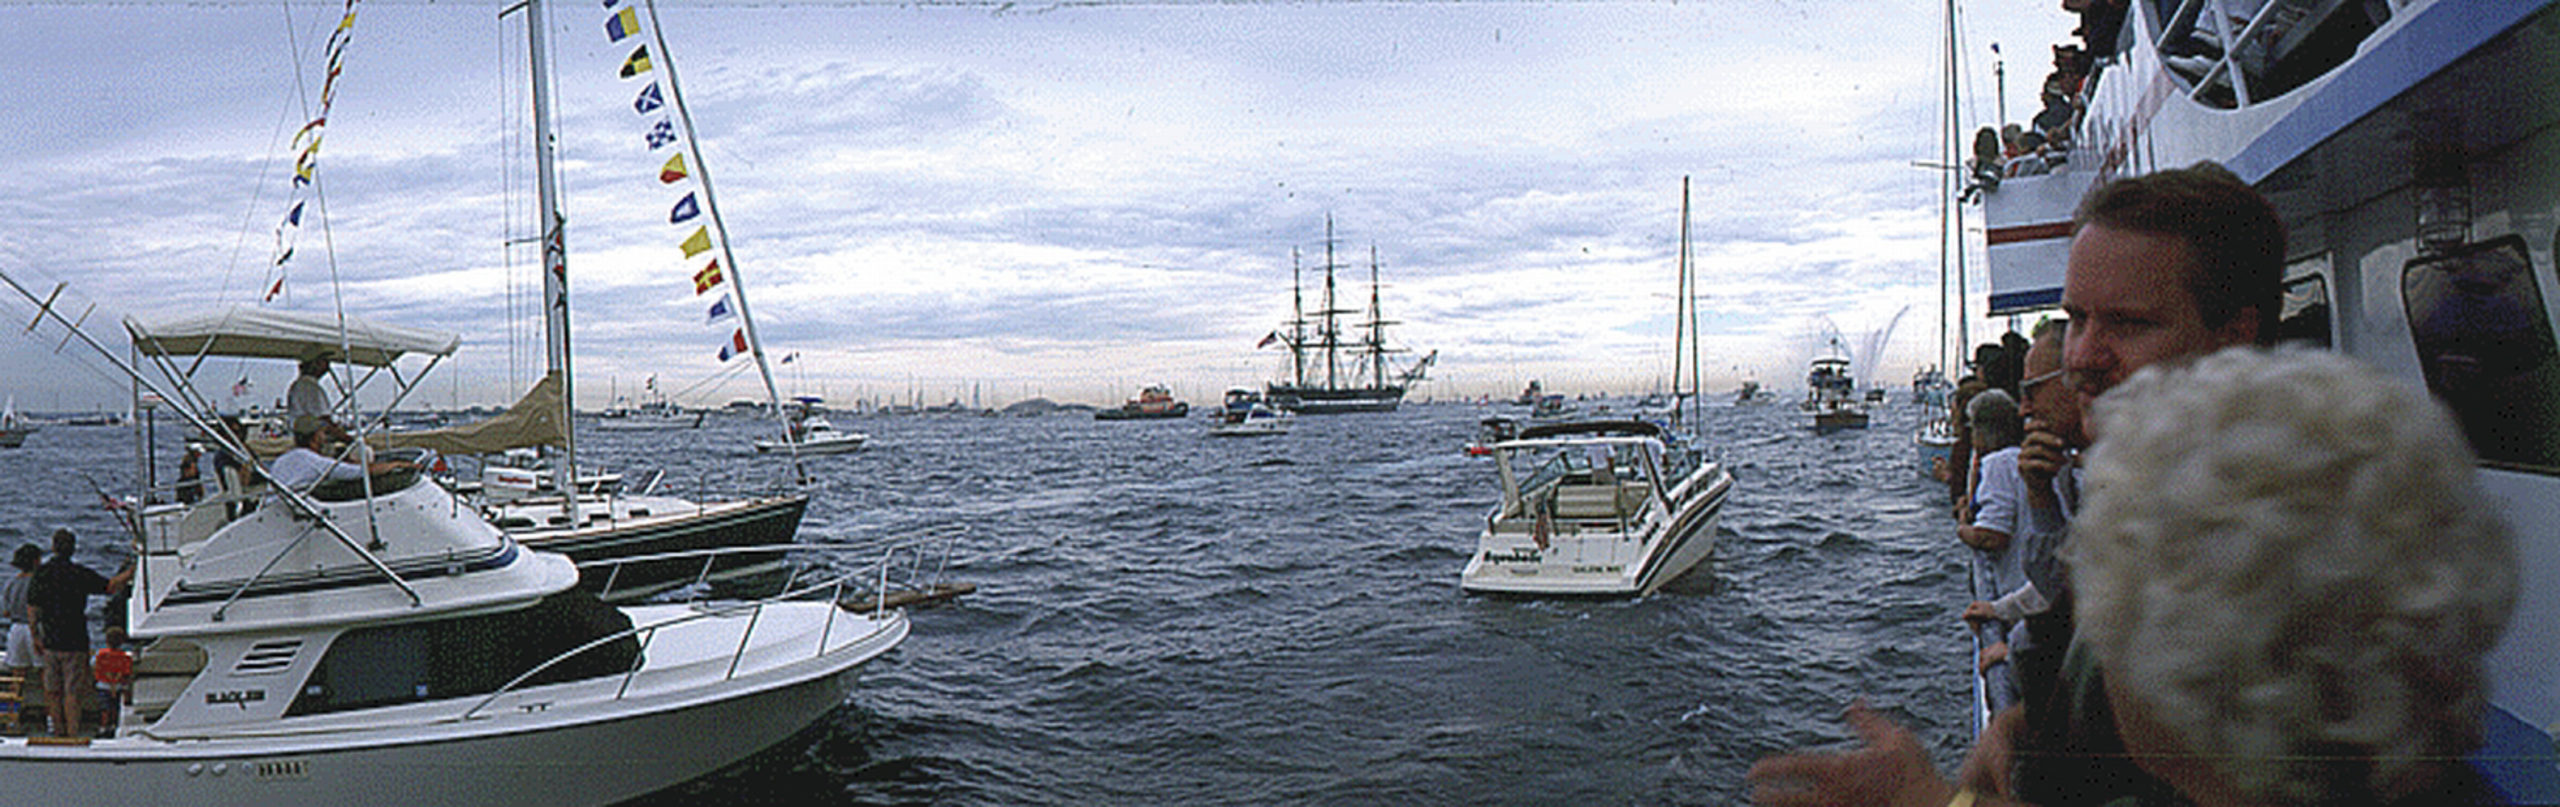 USS Constitution Sets Sail, Marblehead Harbor MA, July 1997